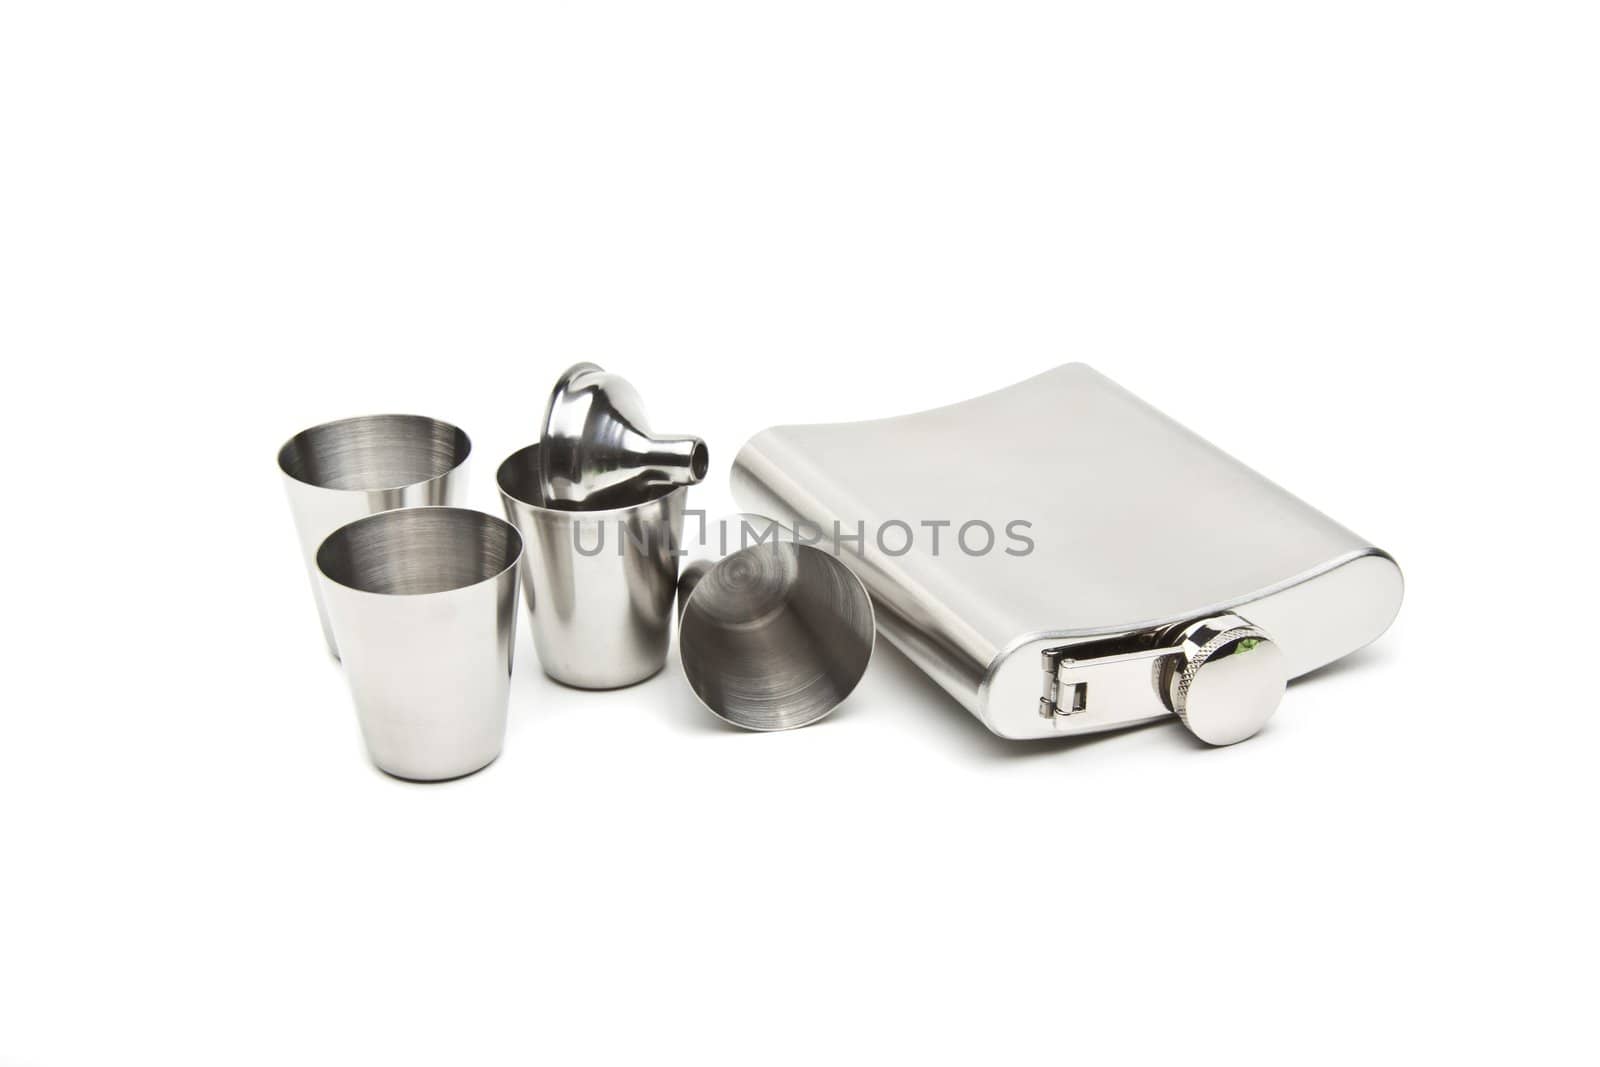 Hip flask and cups with white background